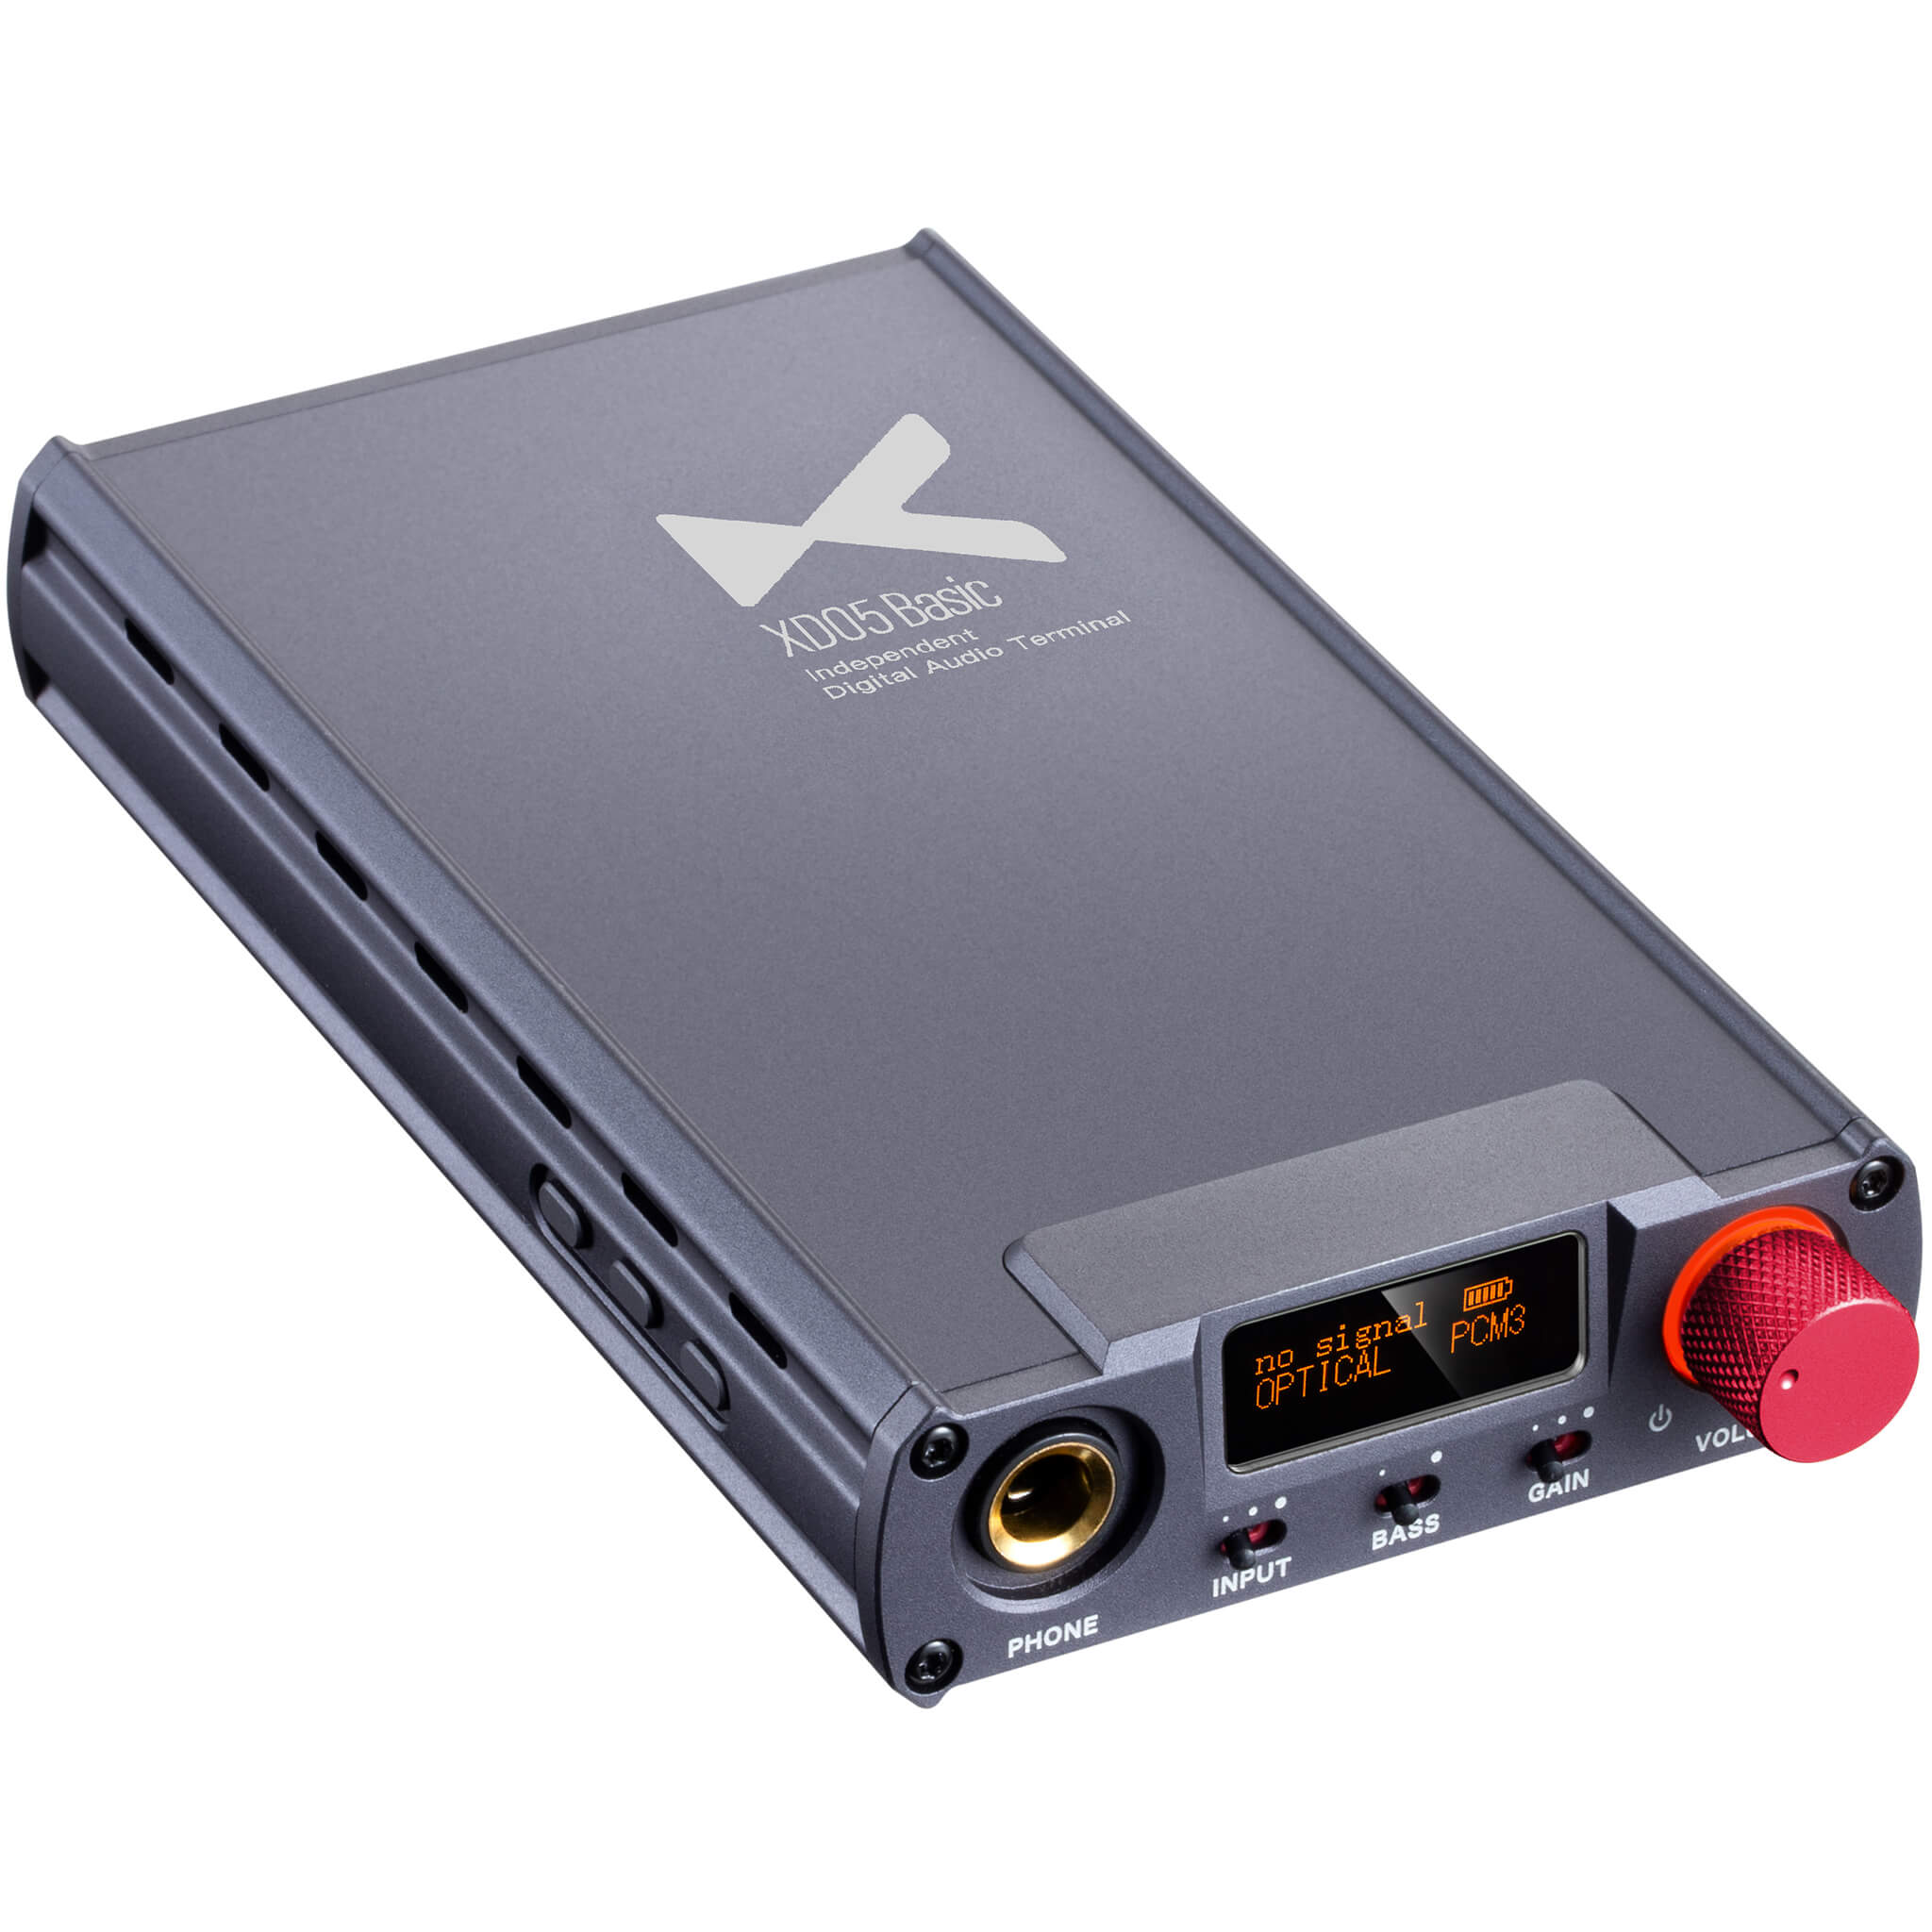 Buy xDuoo XD-05 Basic Headphone Amplifiers at HiFiNage in India with warranty.